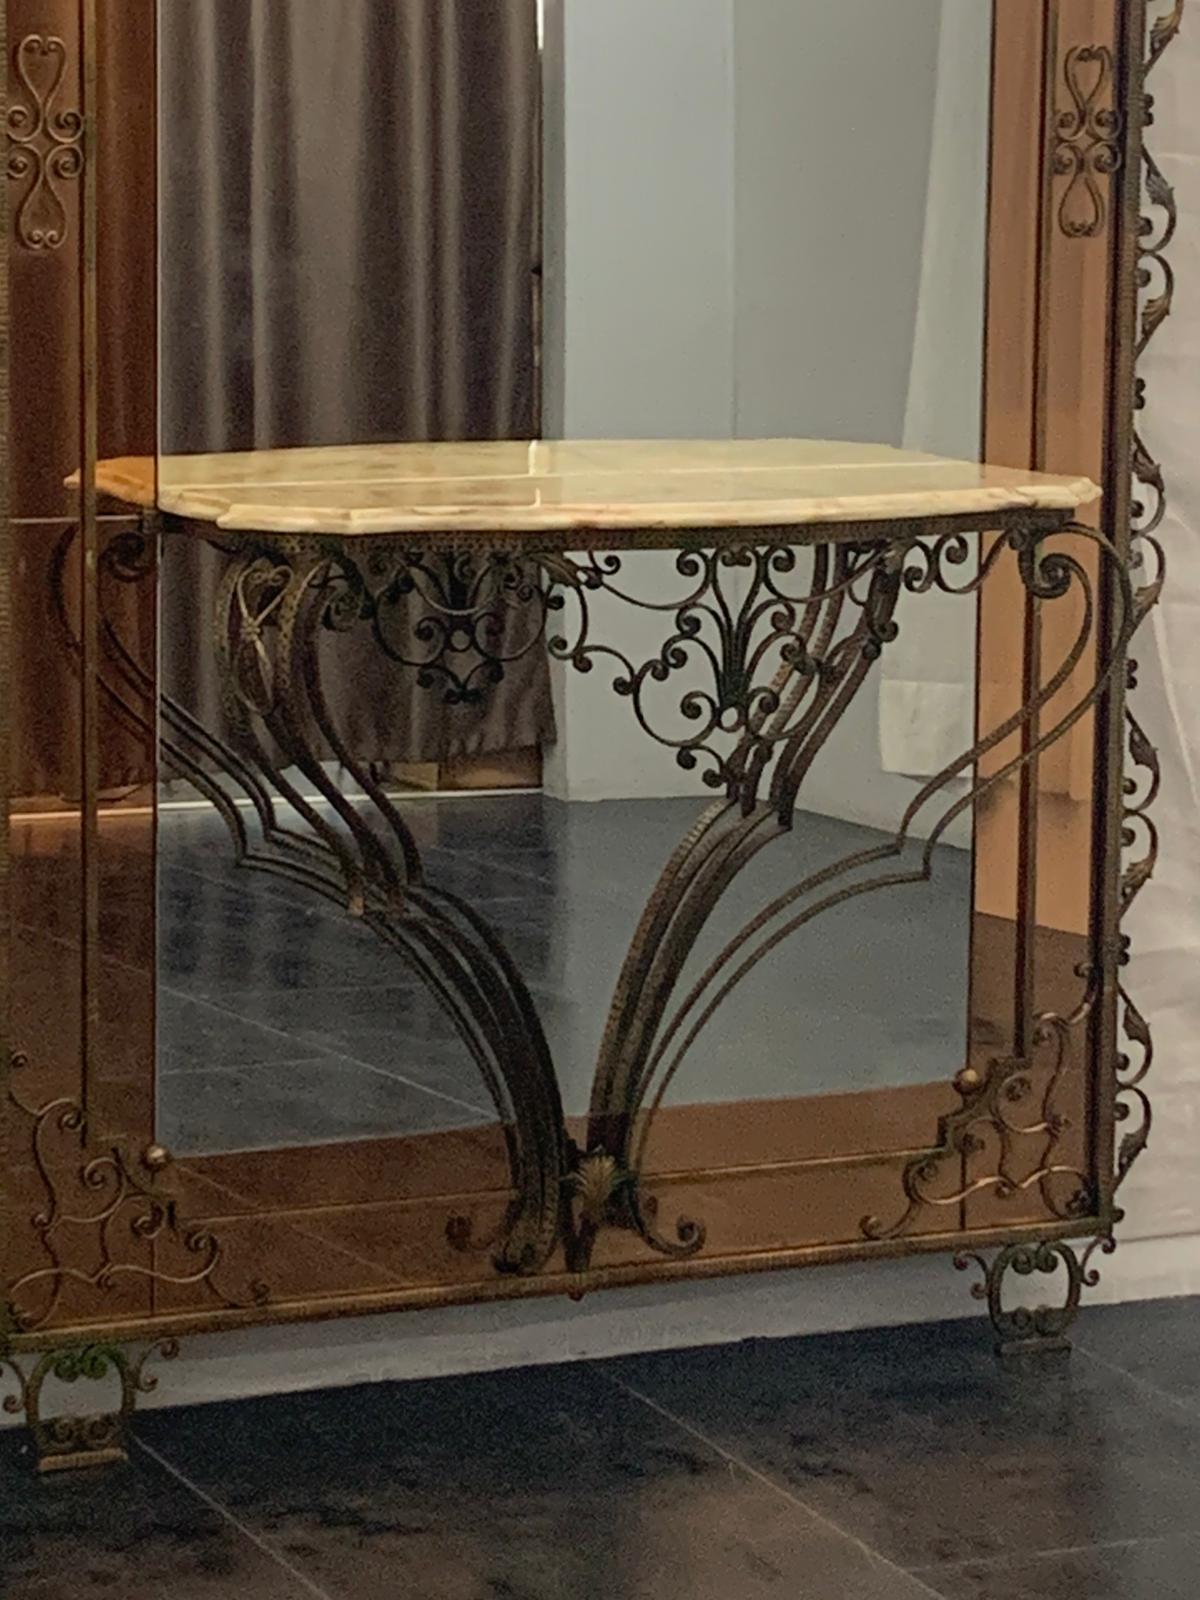 Mid-Century Modern Console Table in Wrought Iron with Mirrored Back by Pierluigi Colli, 1950s For Sale